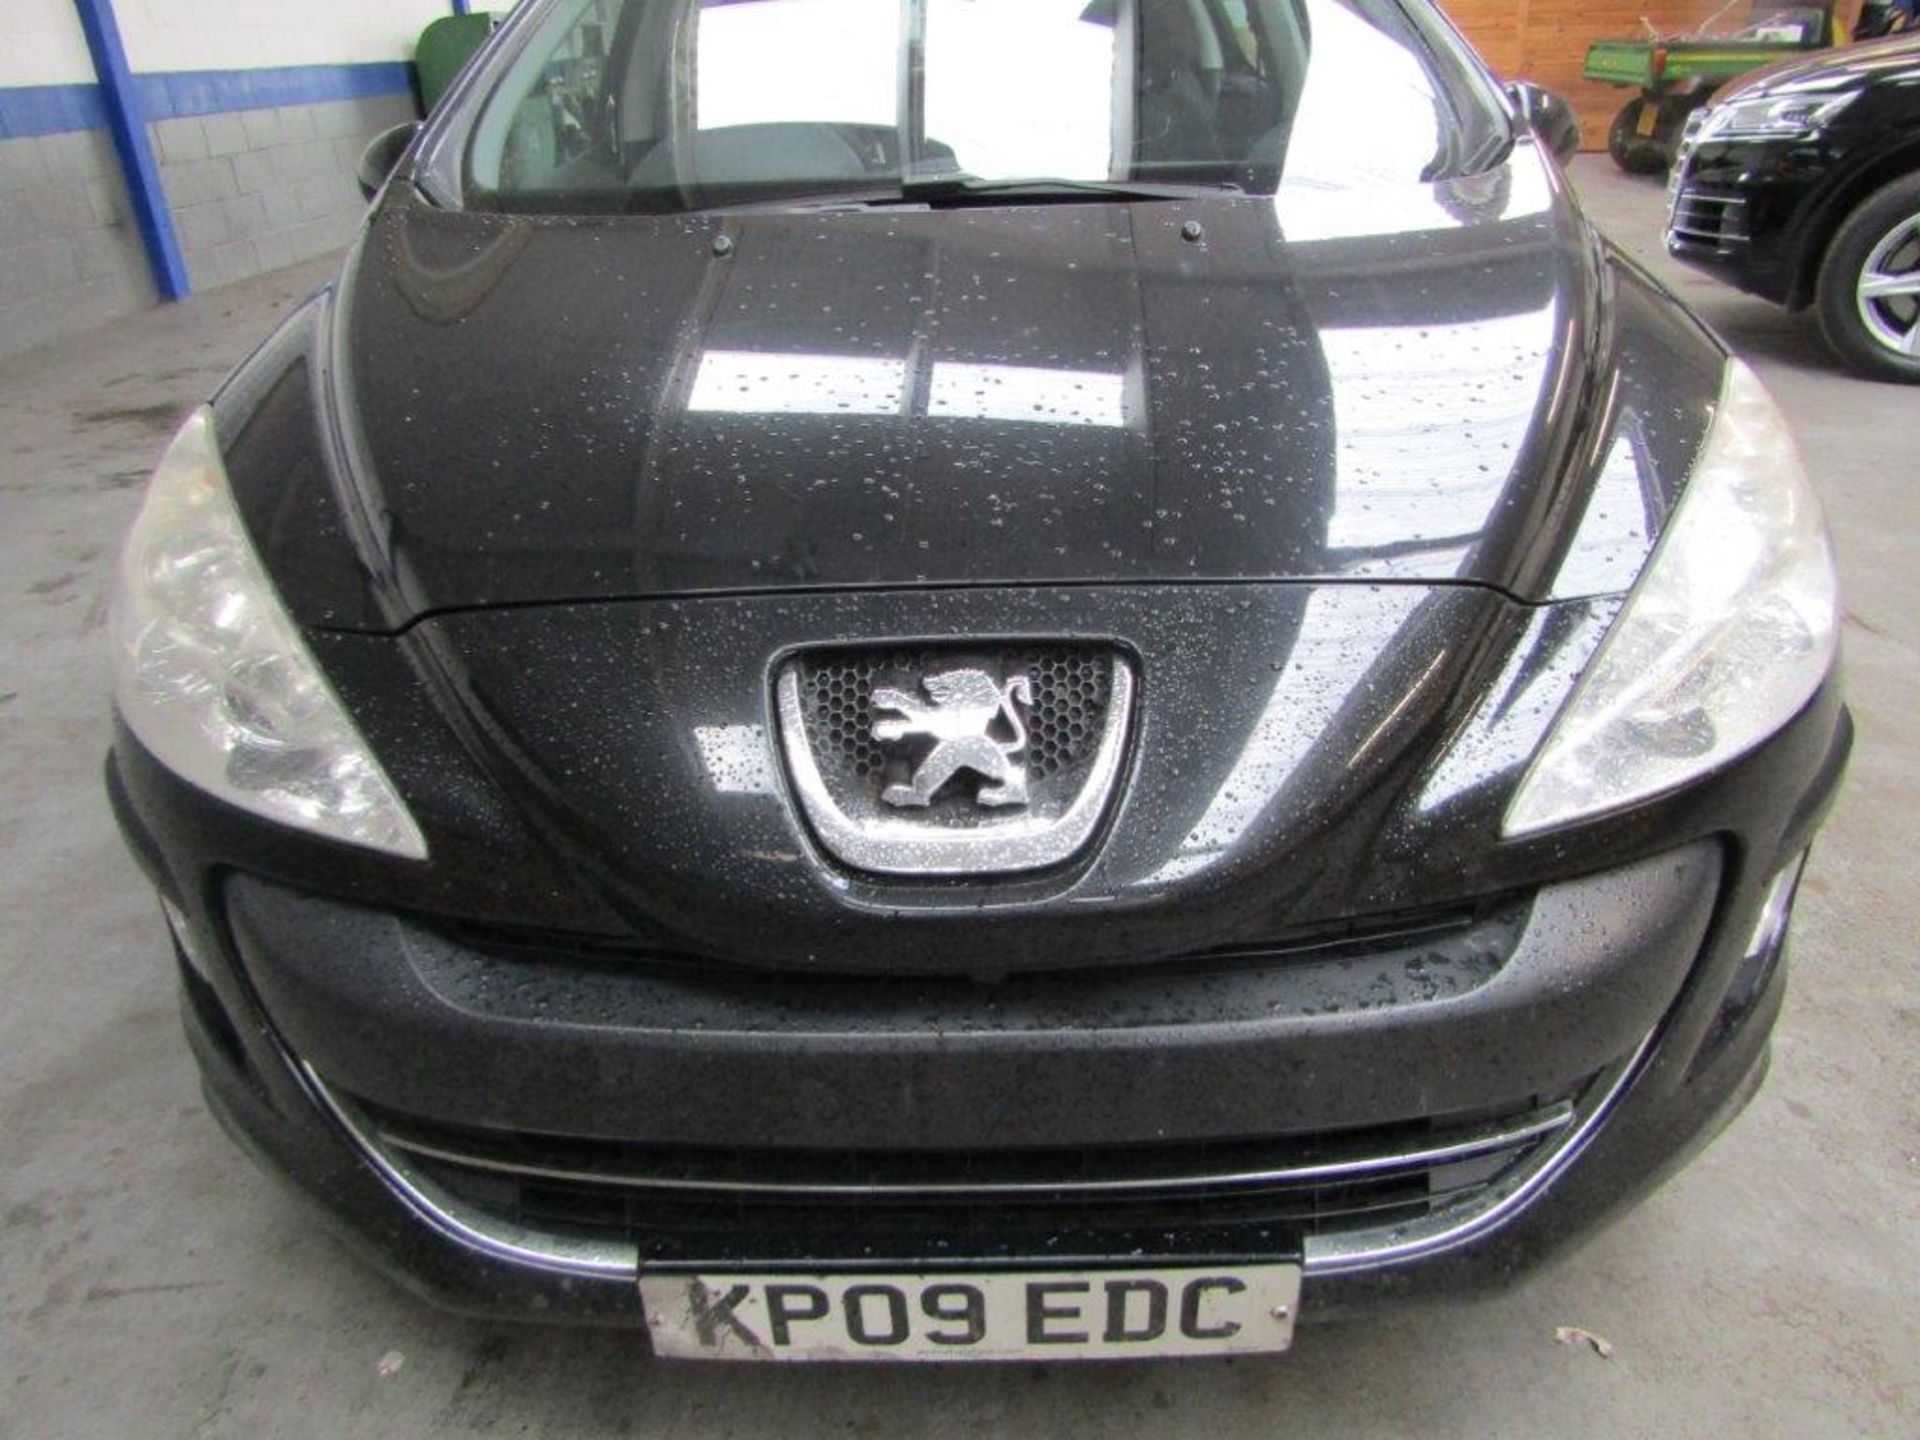 09 09 Peugeot 308 S HDI - Image 3 of 13